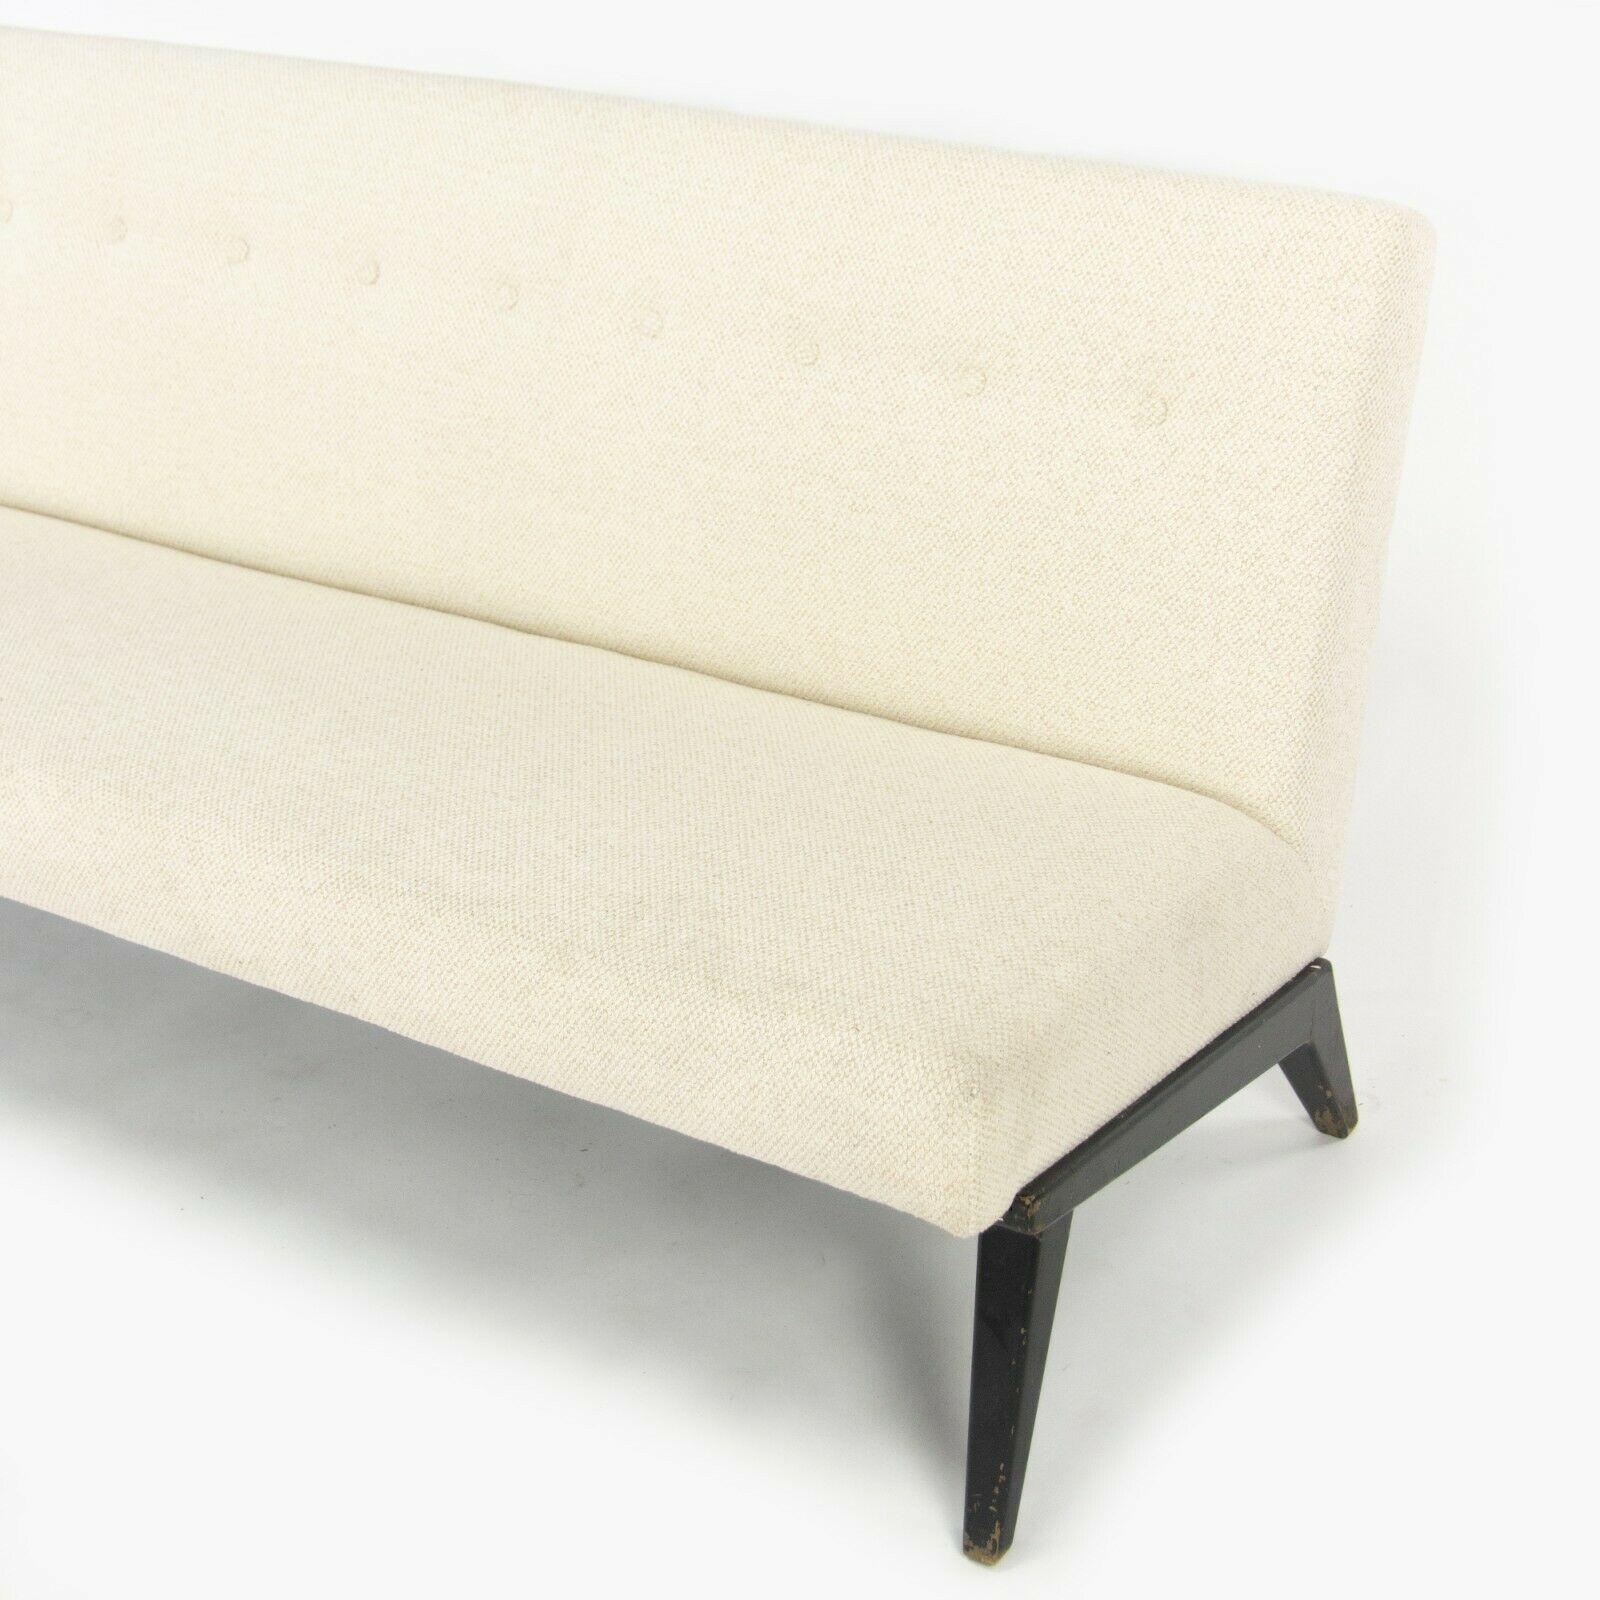 1949 Jens Risom No. 23 Sofa with New Upholstery Signed H.G. Knoll Products For Sale 3